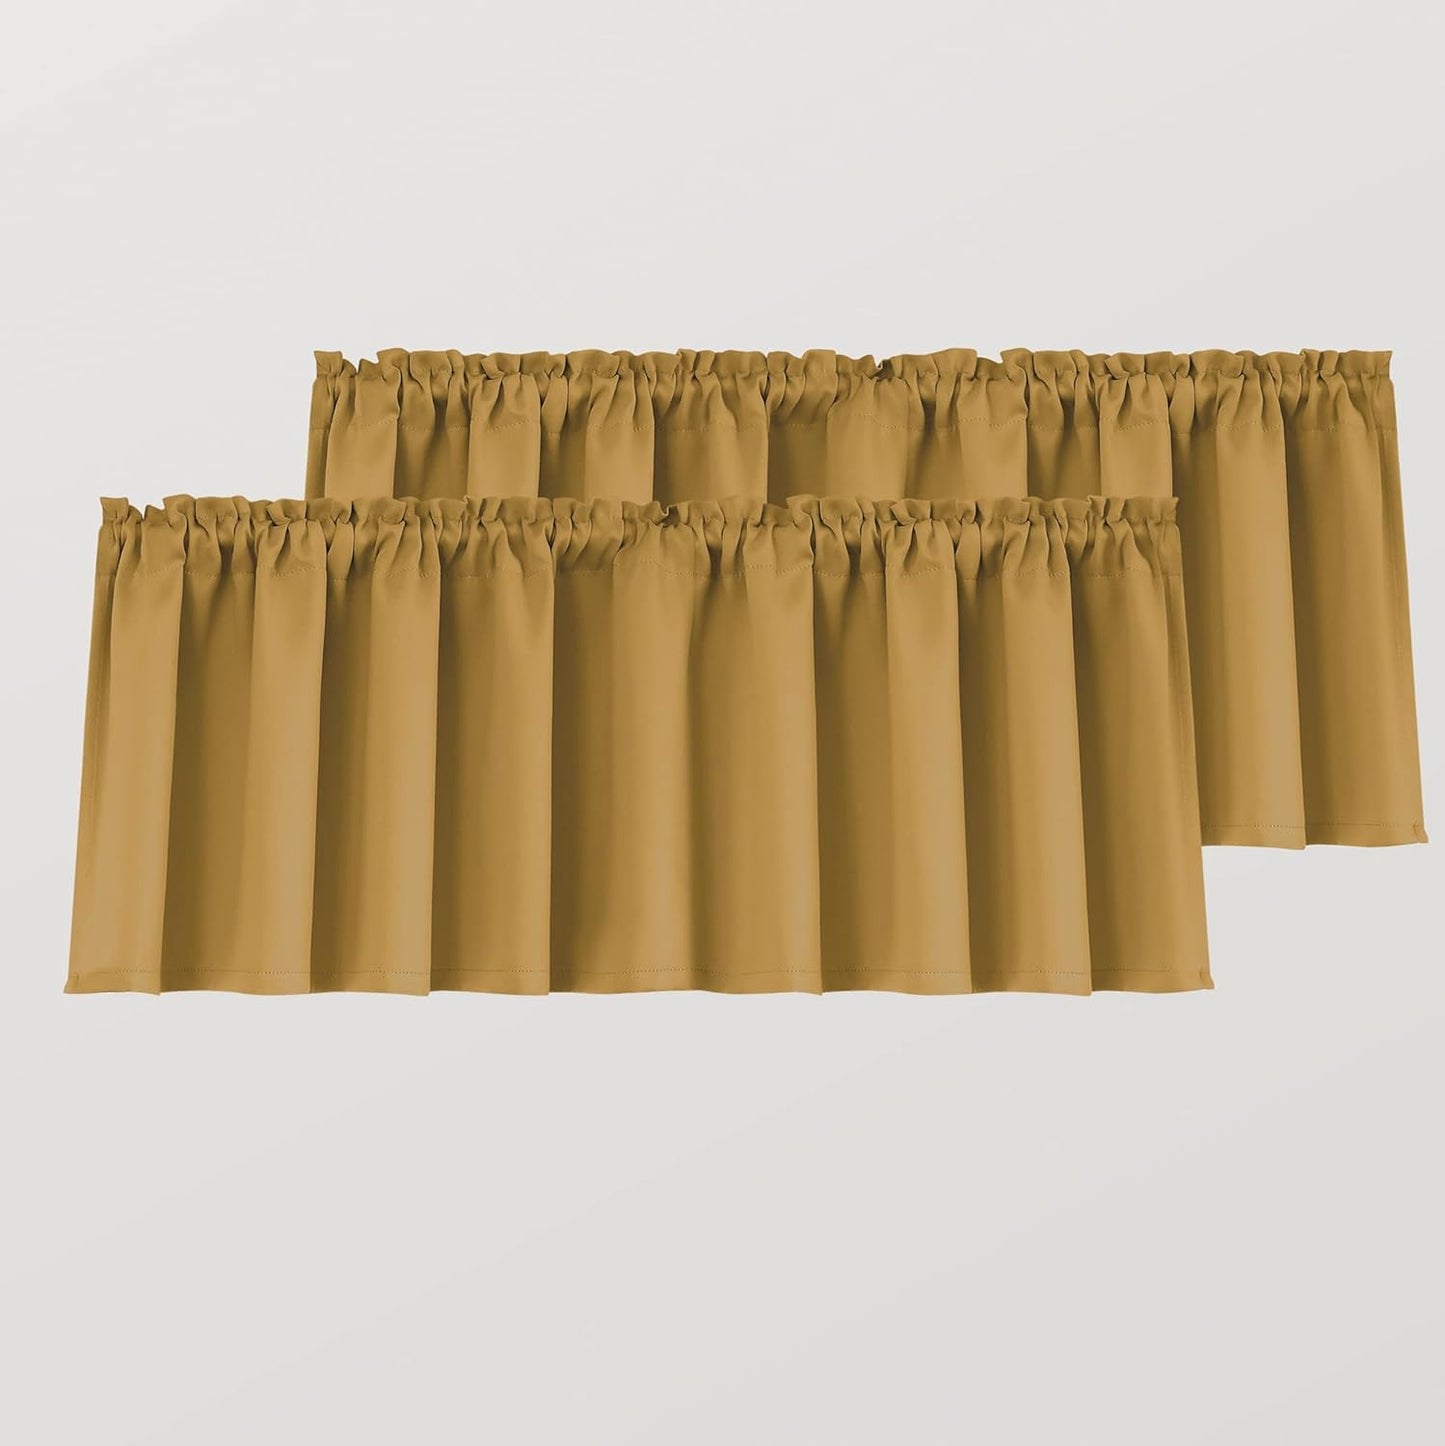 Mrs.Naturall Beige Valance Curtains for Windows 36X16 Inch Length  MRS.NATURALL TEXTILE Gold 52X18 